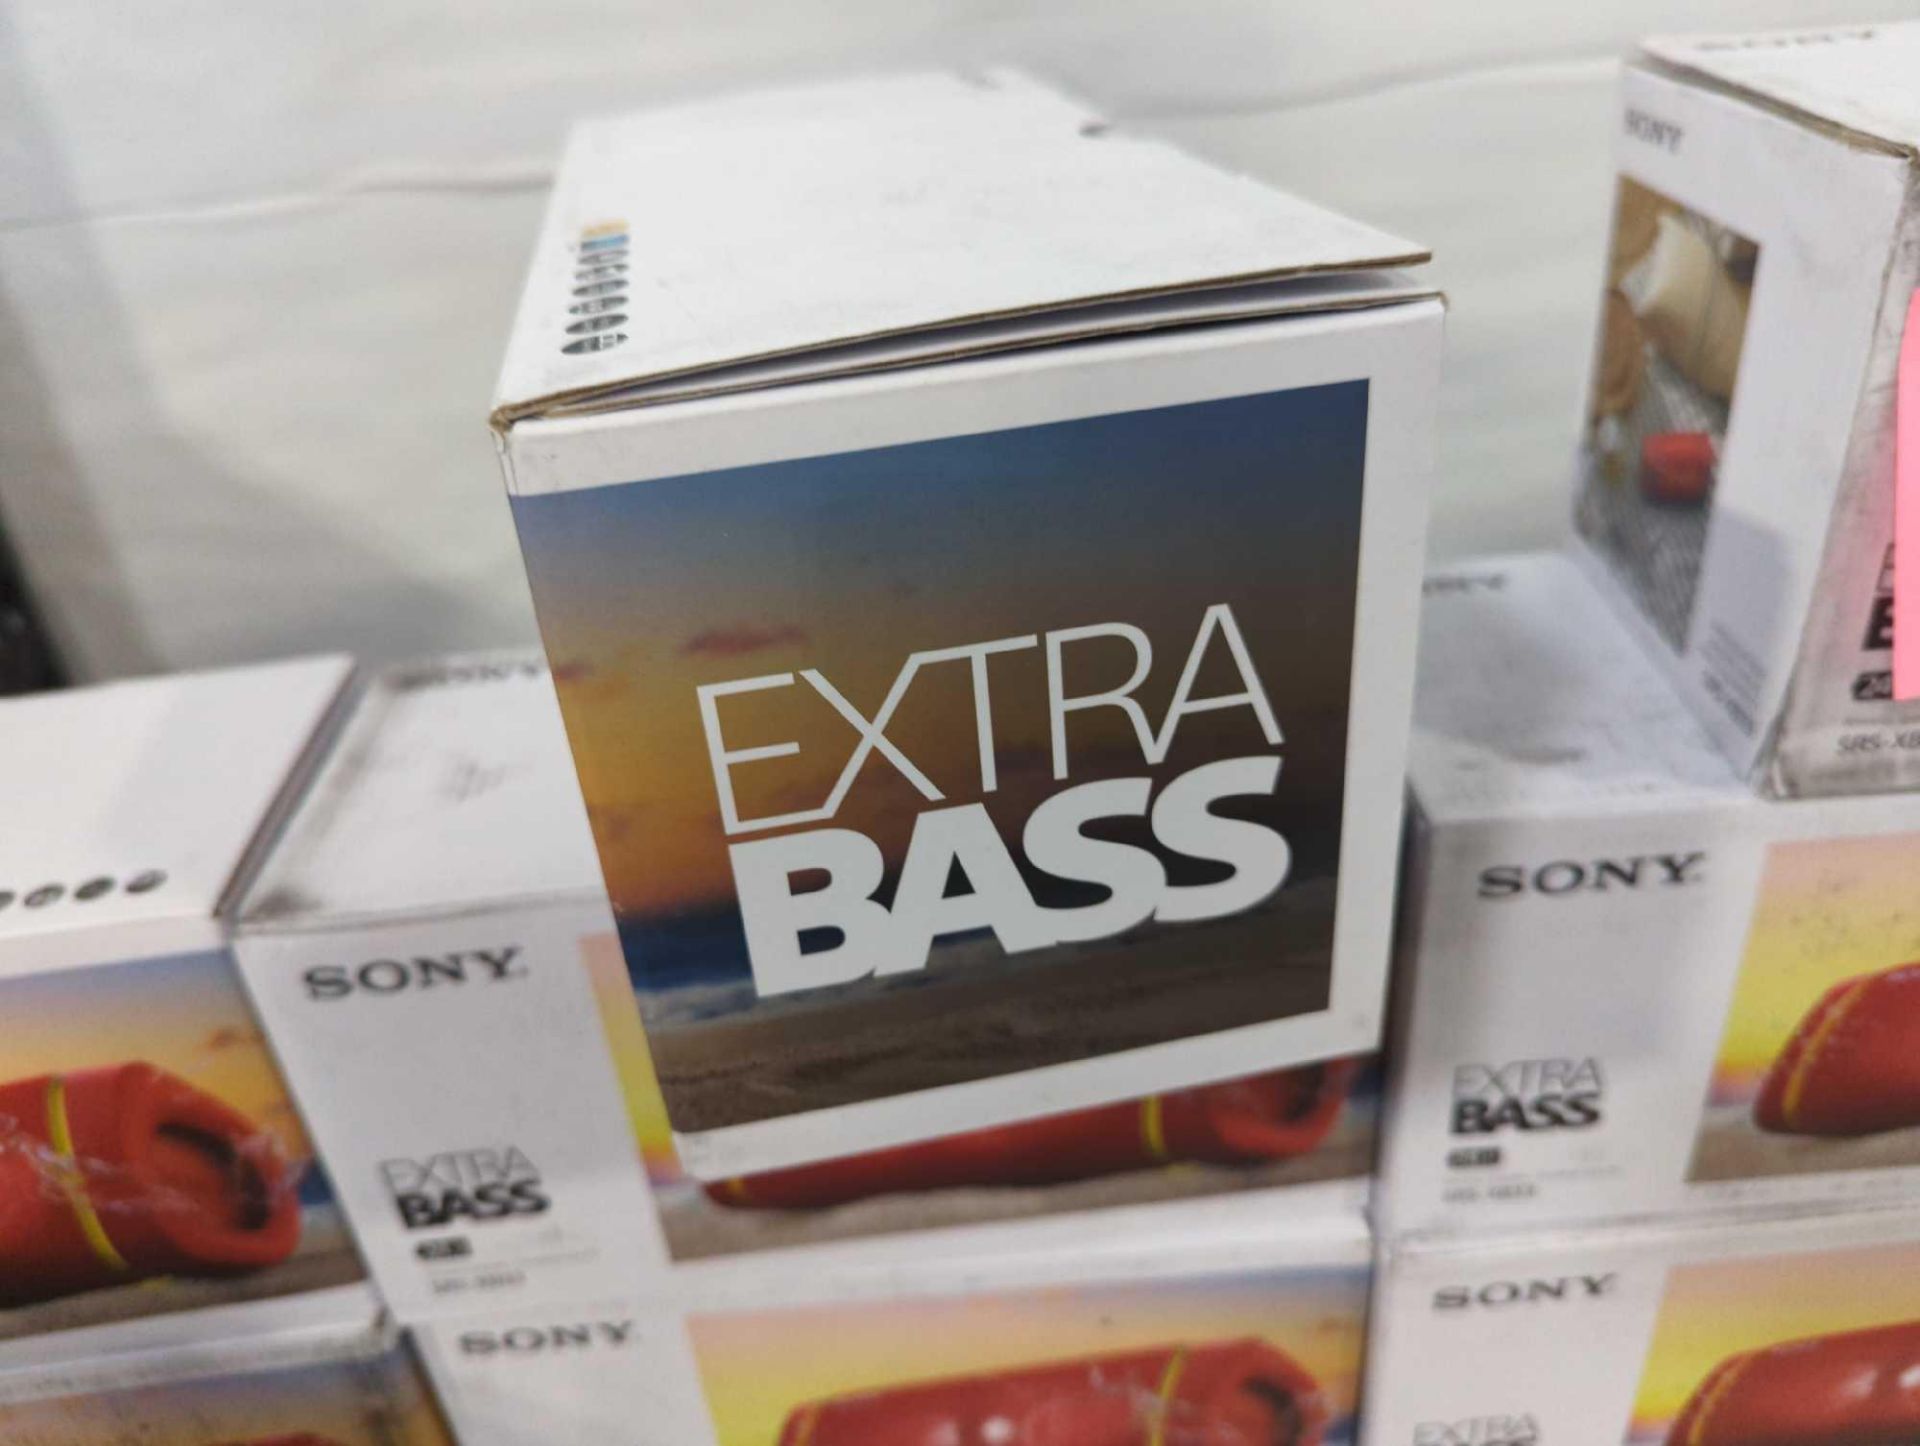 Sony Extra Bass Speakers - Image 5 of 6